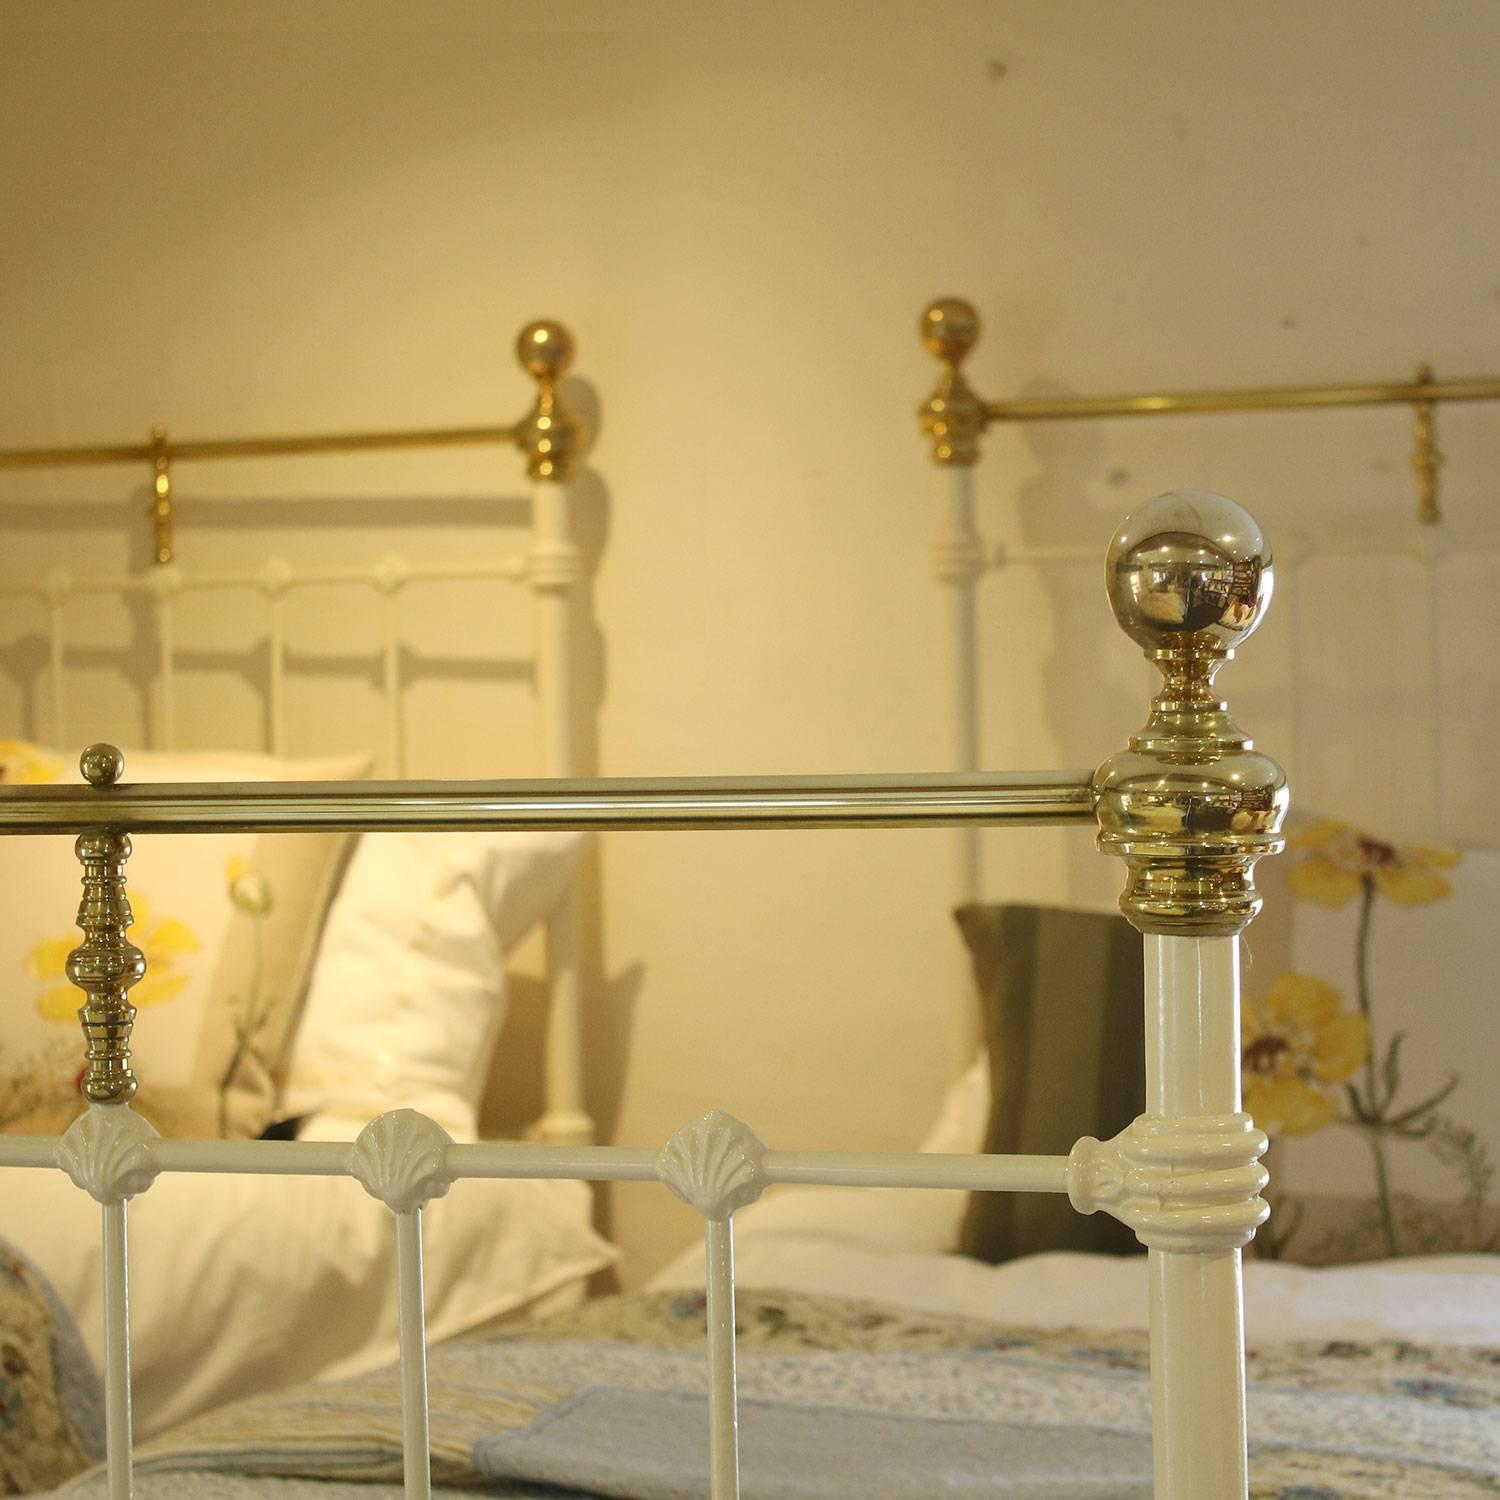 A matching pair of twin brass and iron beds finished in cream with straight brass top rails.

These beds accept 3 ft wide (36 inch or 90 cm) bases and mattresses.

The price is for the beds alone, the bases, mattresses, bedding and linen are